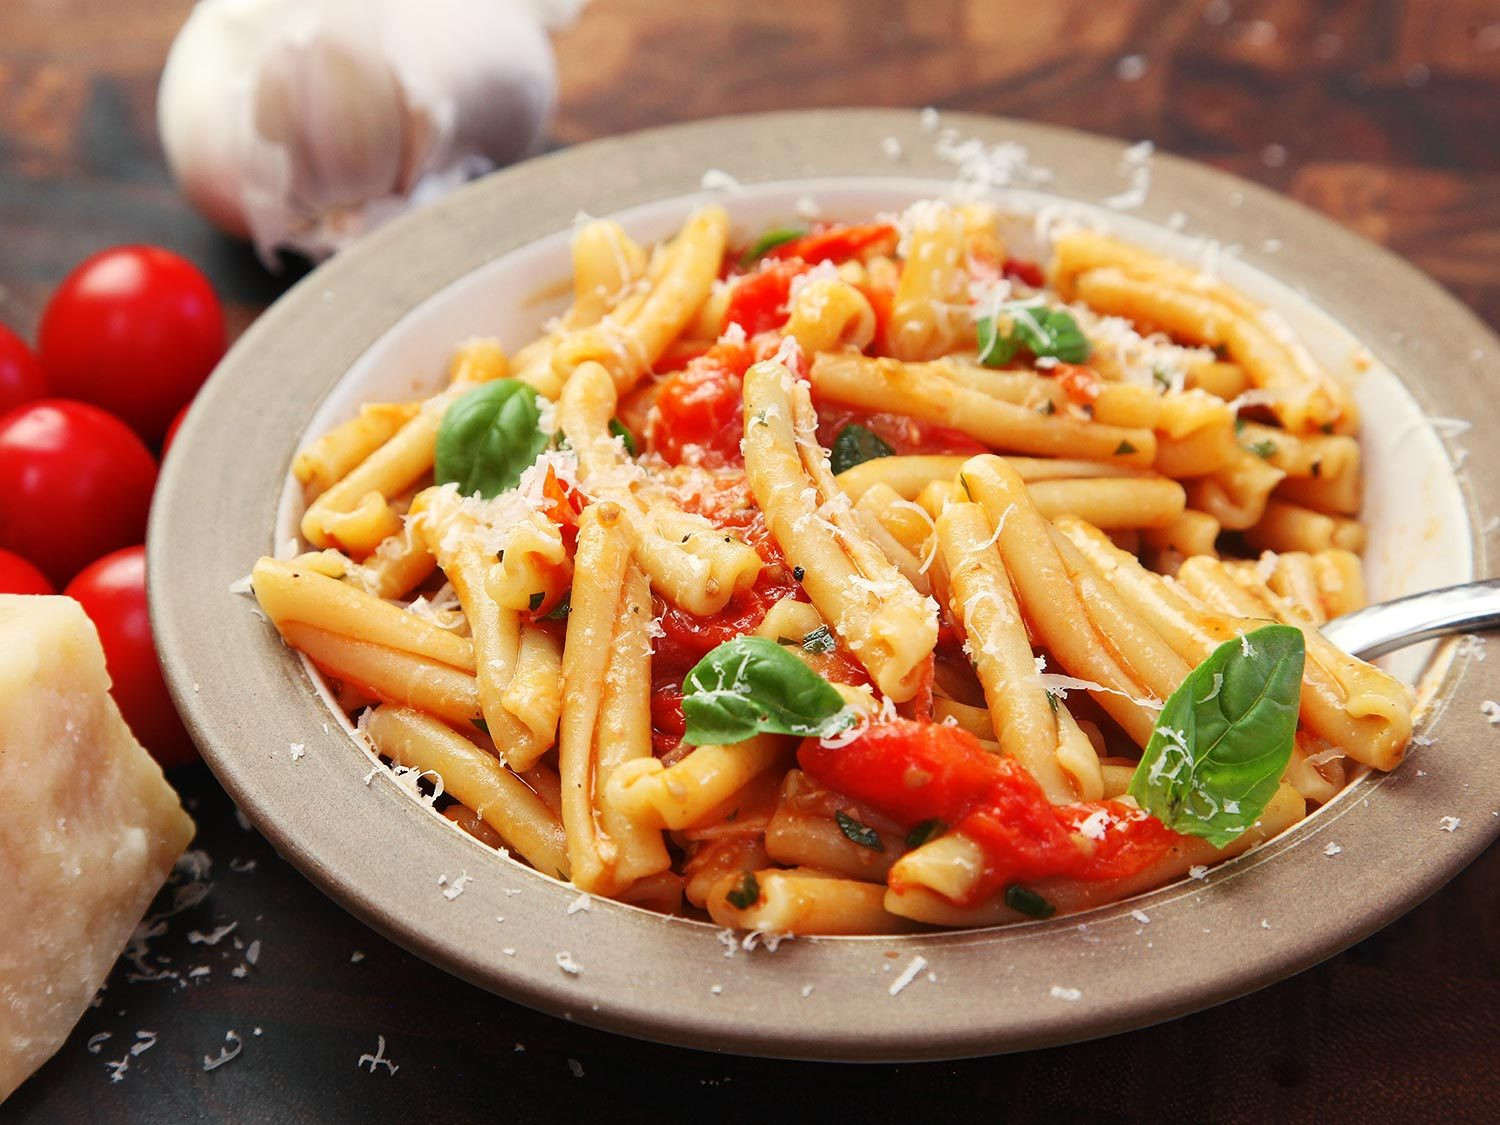 Receipes For Pasta Sauces
 Fast and Easy Pasta With Blistered Cherry Tomato Sauce